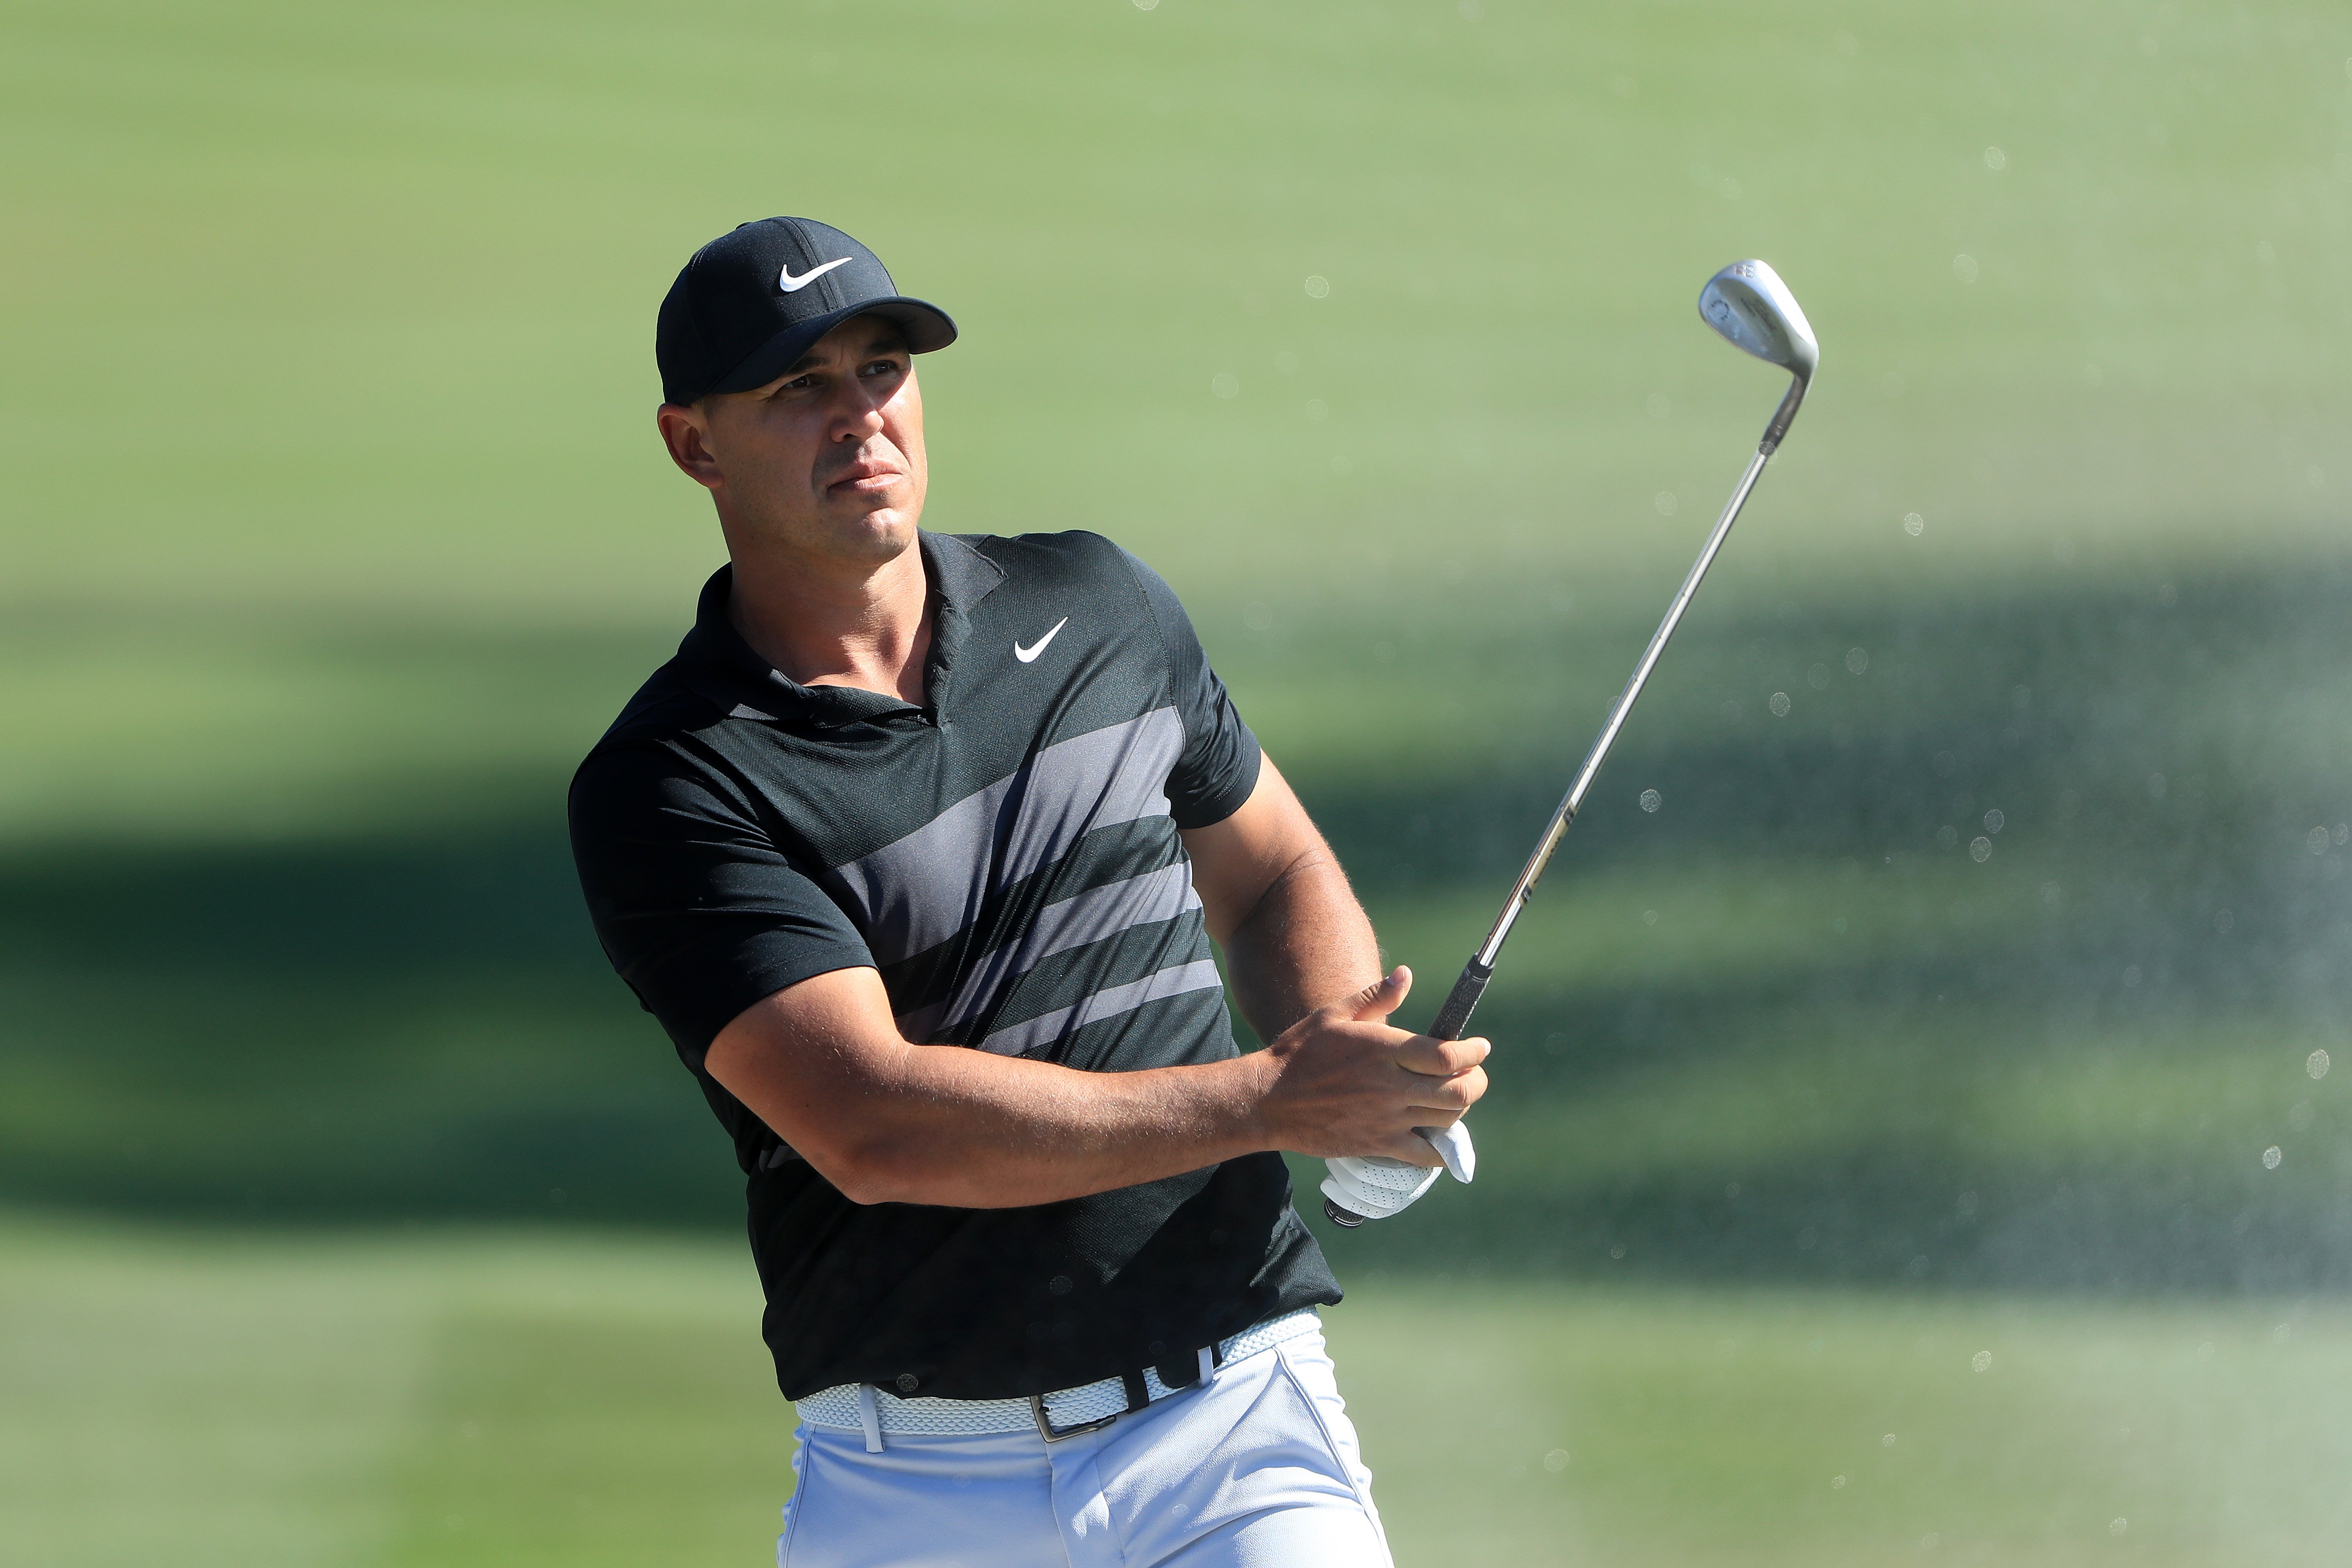 Brooks Koepka during the first round of The PLAYERS Championship at TPC Sawgrass on March 12, 2020 | Photo: Getty Images